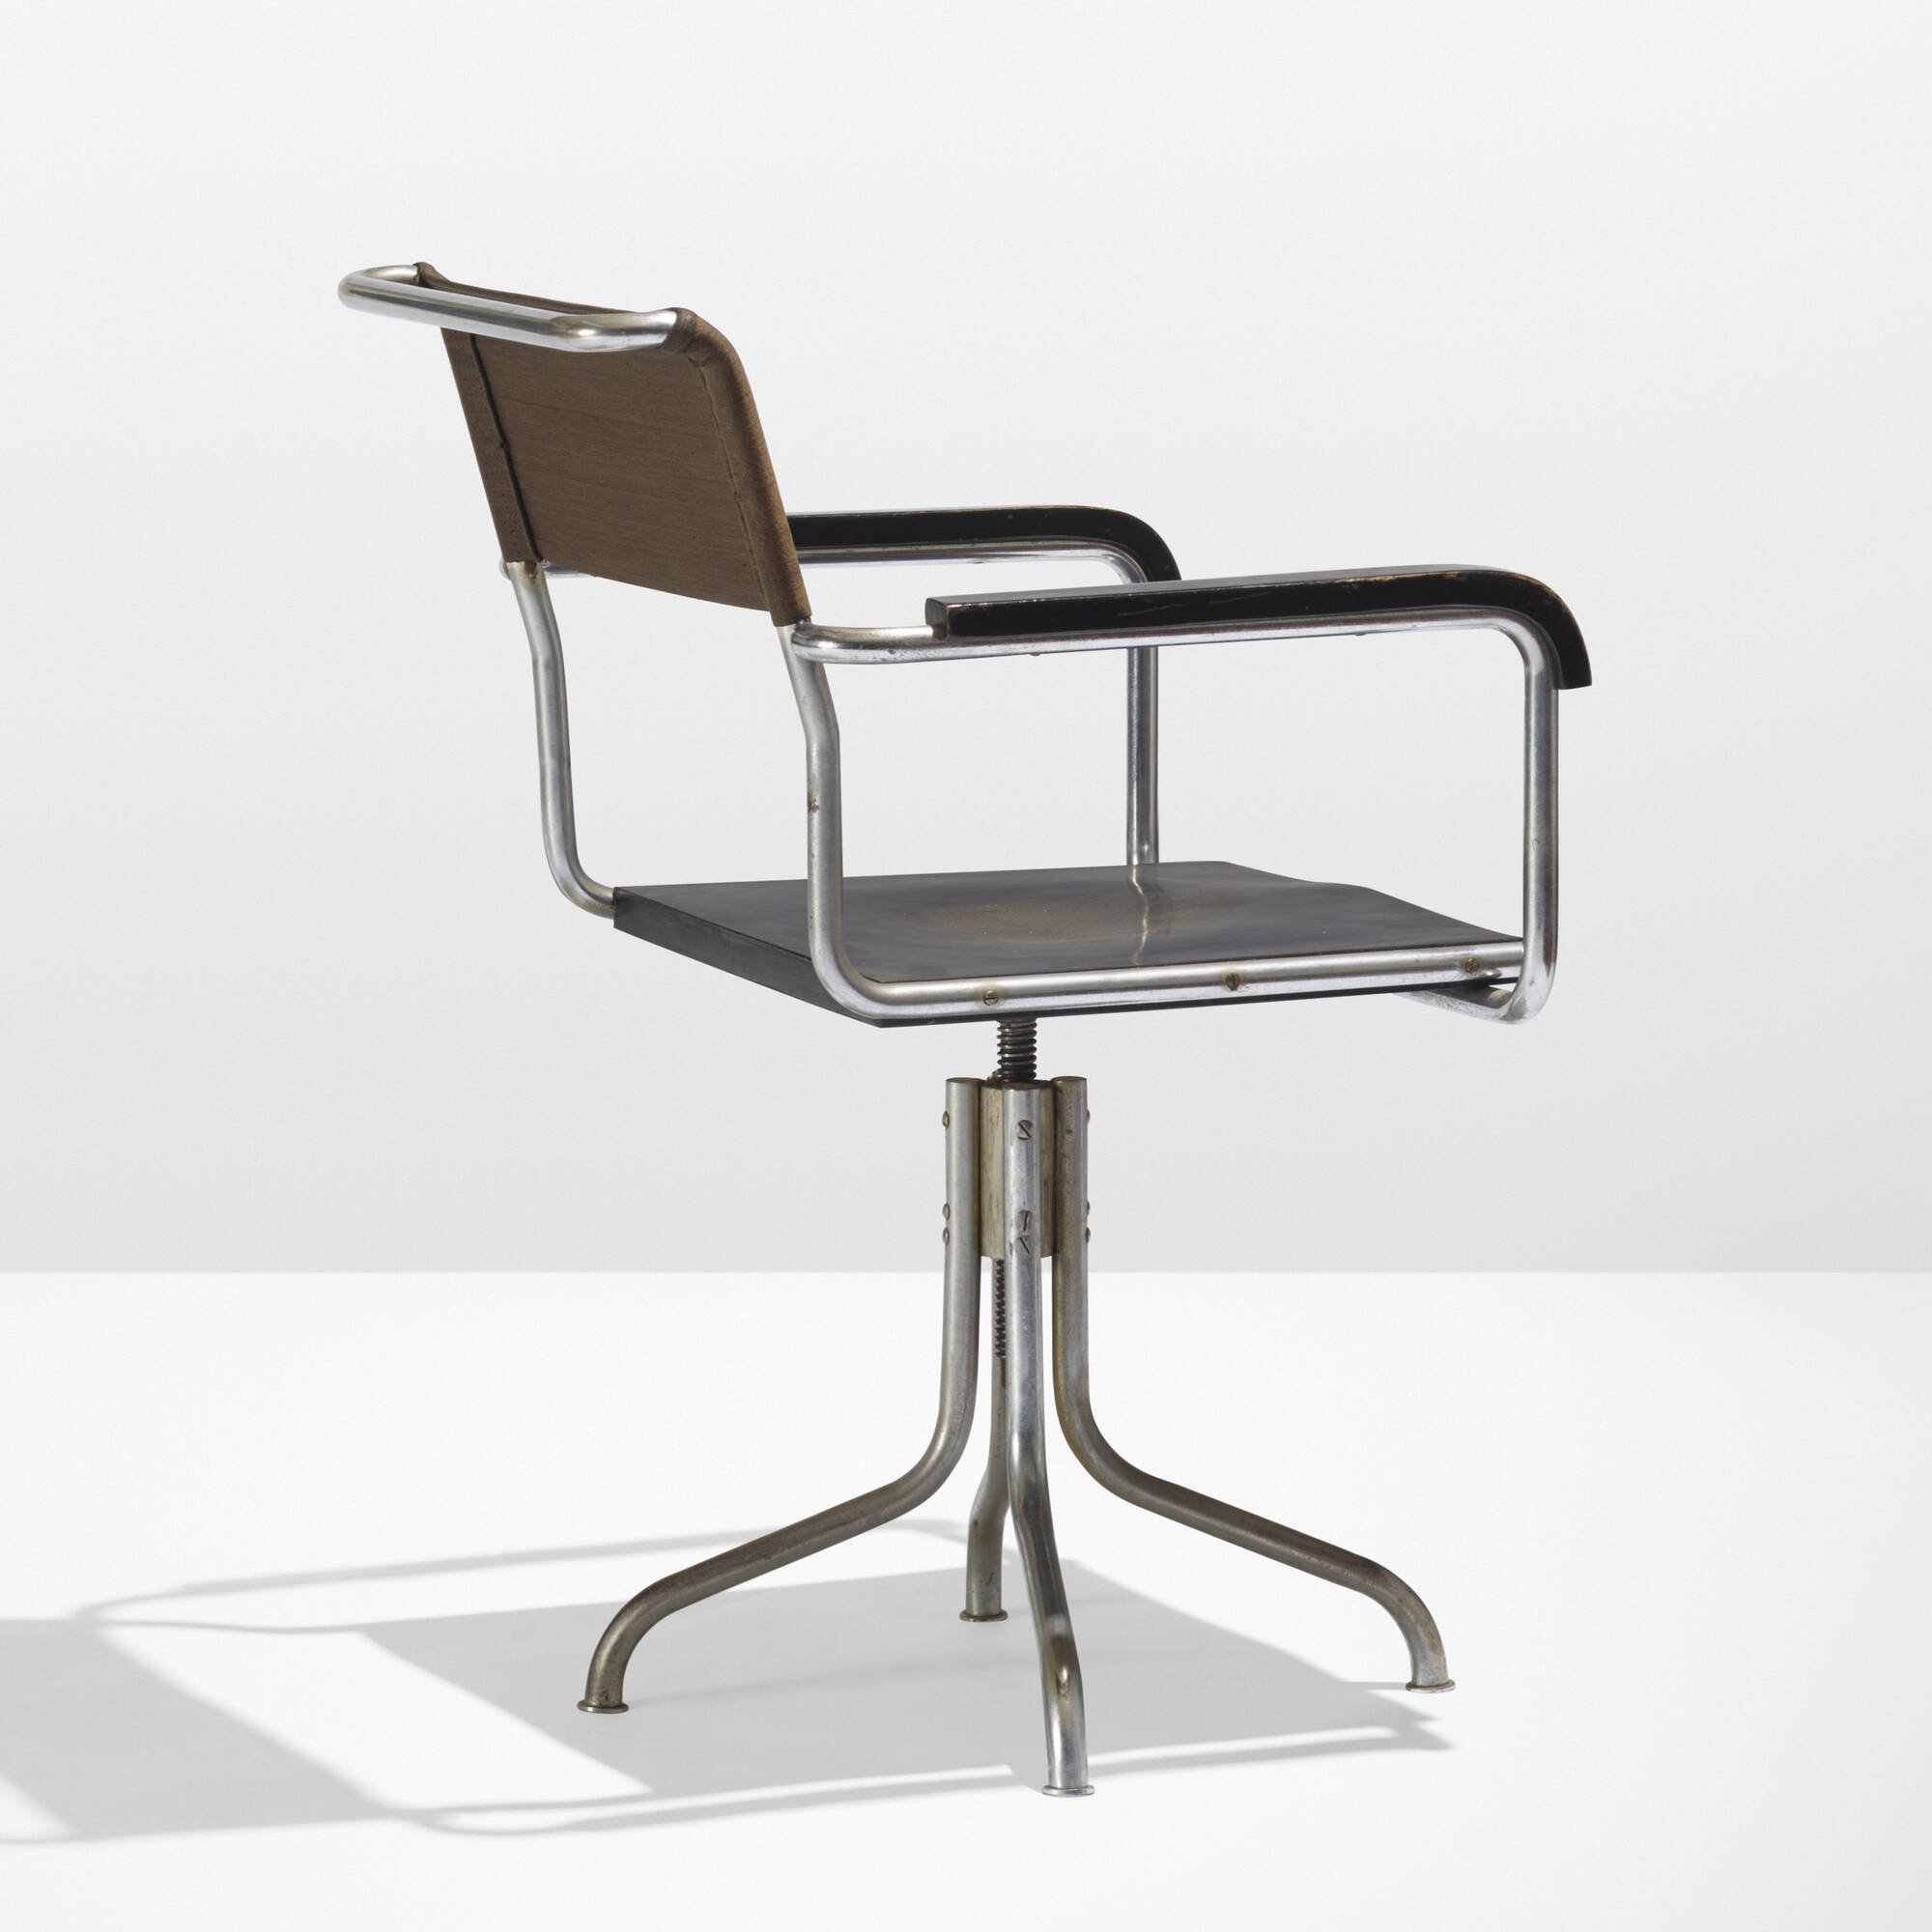 https://www.wright20.com/items/index/2000/131_1_international_style_the_boyd_collection_november_2019_marcel_breuer_adjustable_armchair_model_b7a__wright_auction.jpg?t=1692625986